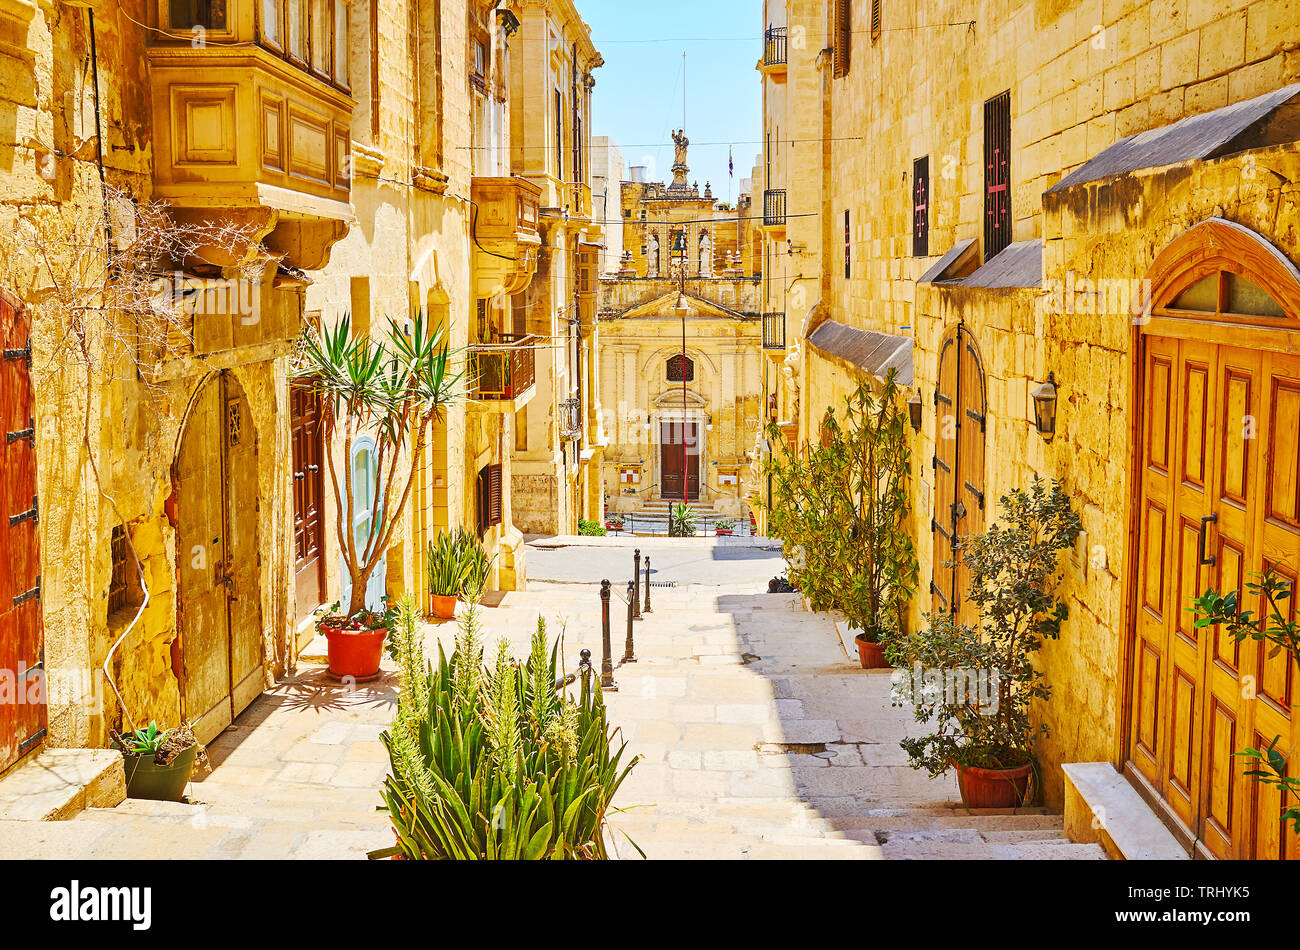 The medieval St Lucia street is decorated with green plants in pots; the same named church is seen at the end of the descent, Valletta, Malta. Stock Photo